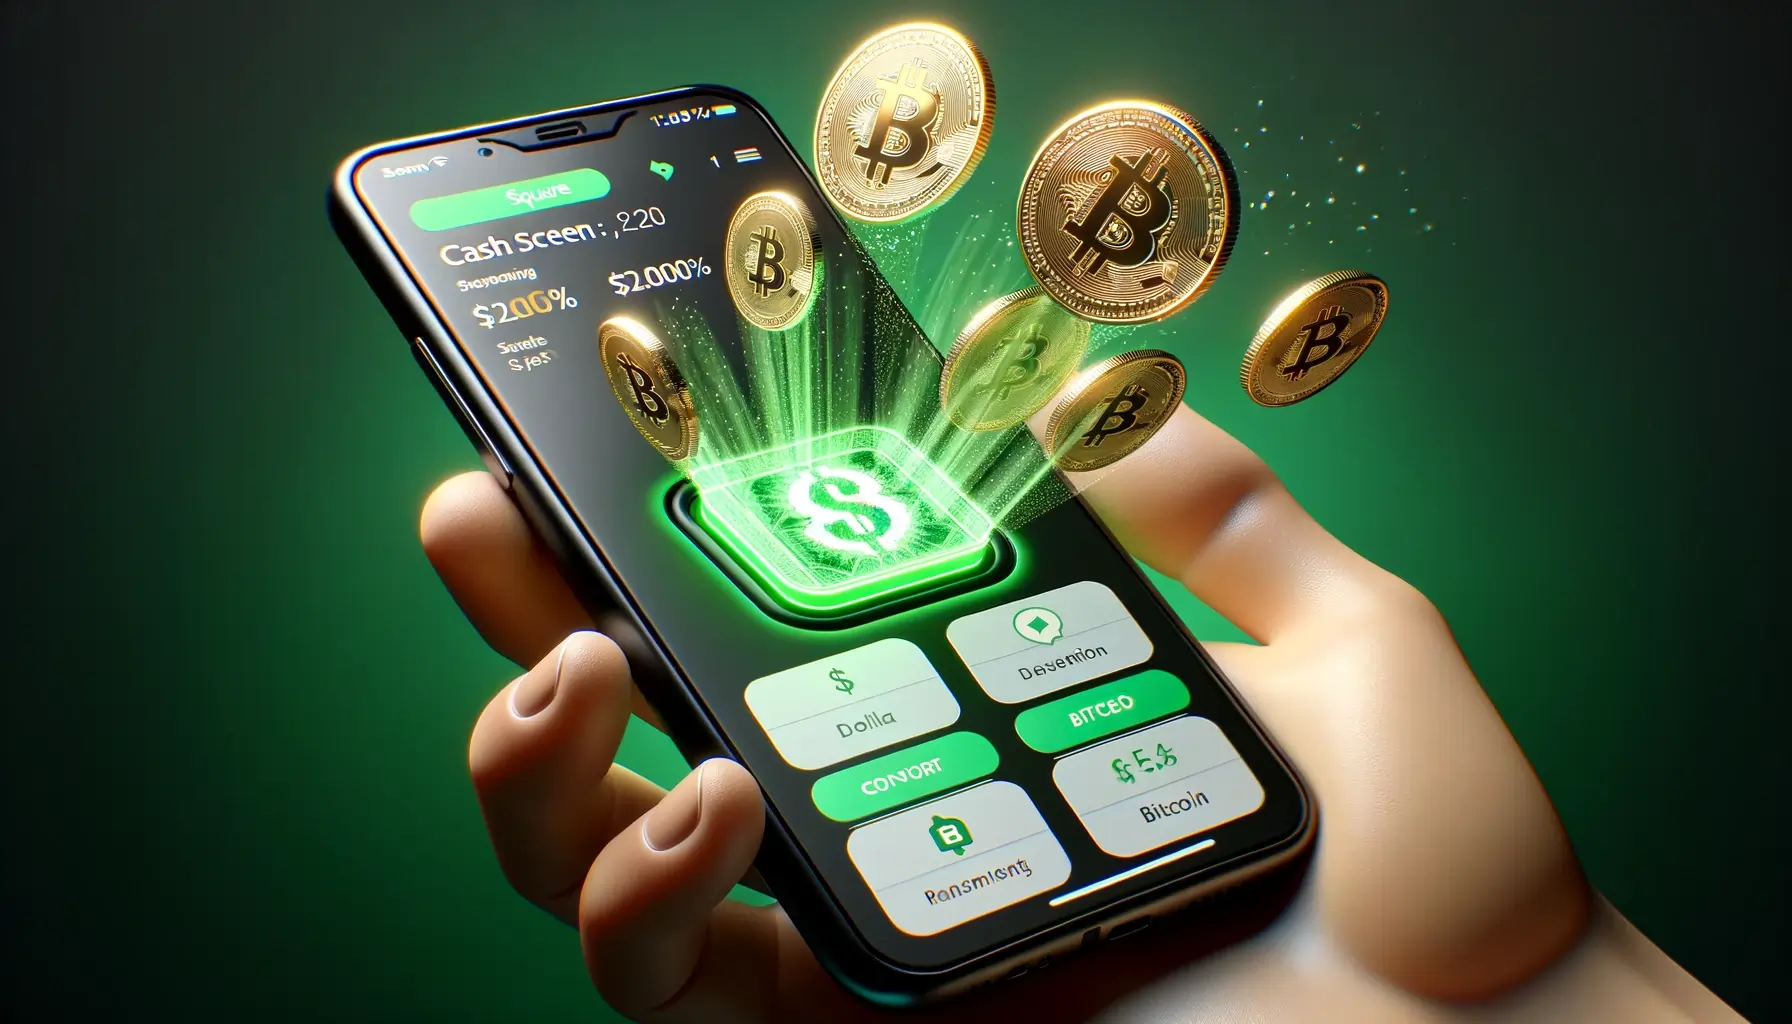 Cash App enables Square sellers to convert 10% of transactions into Bitcoin